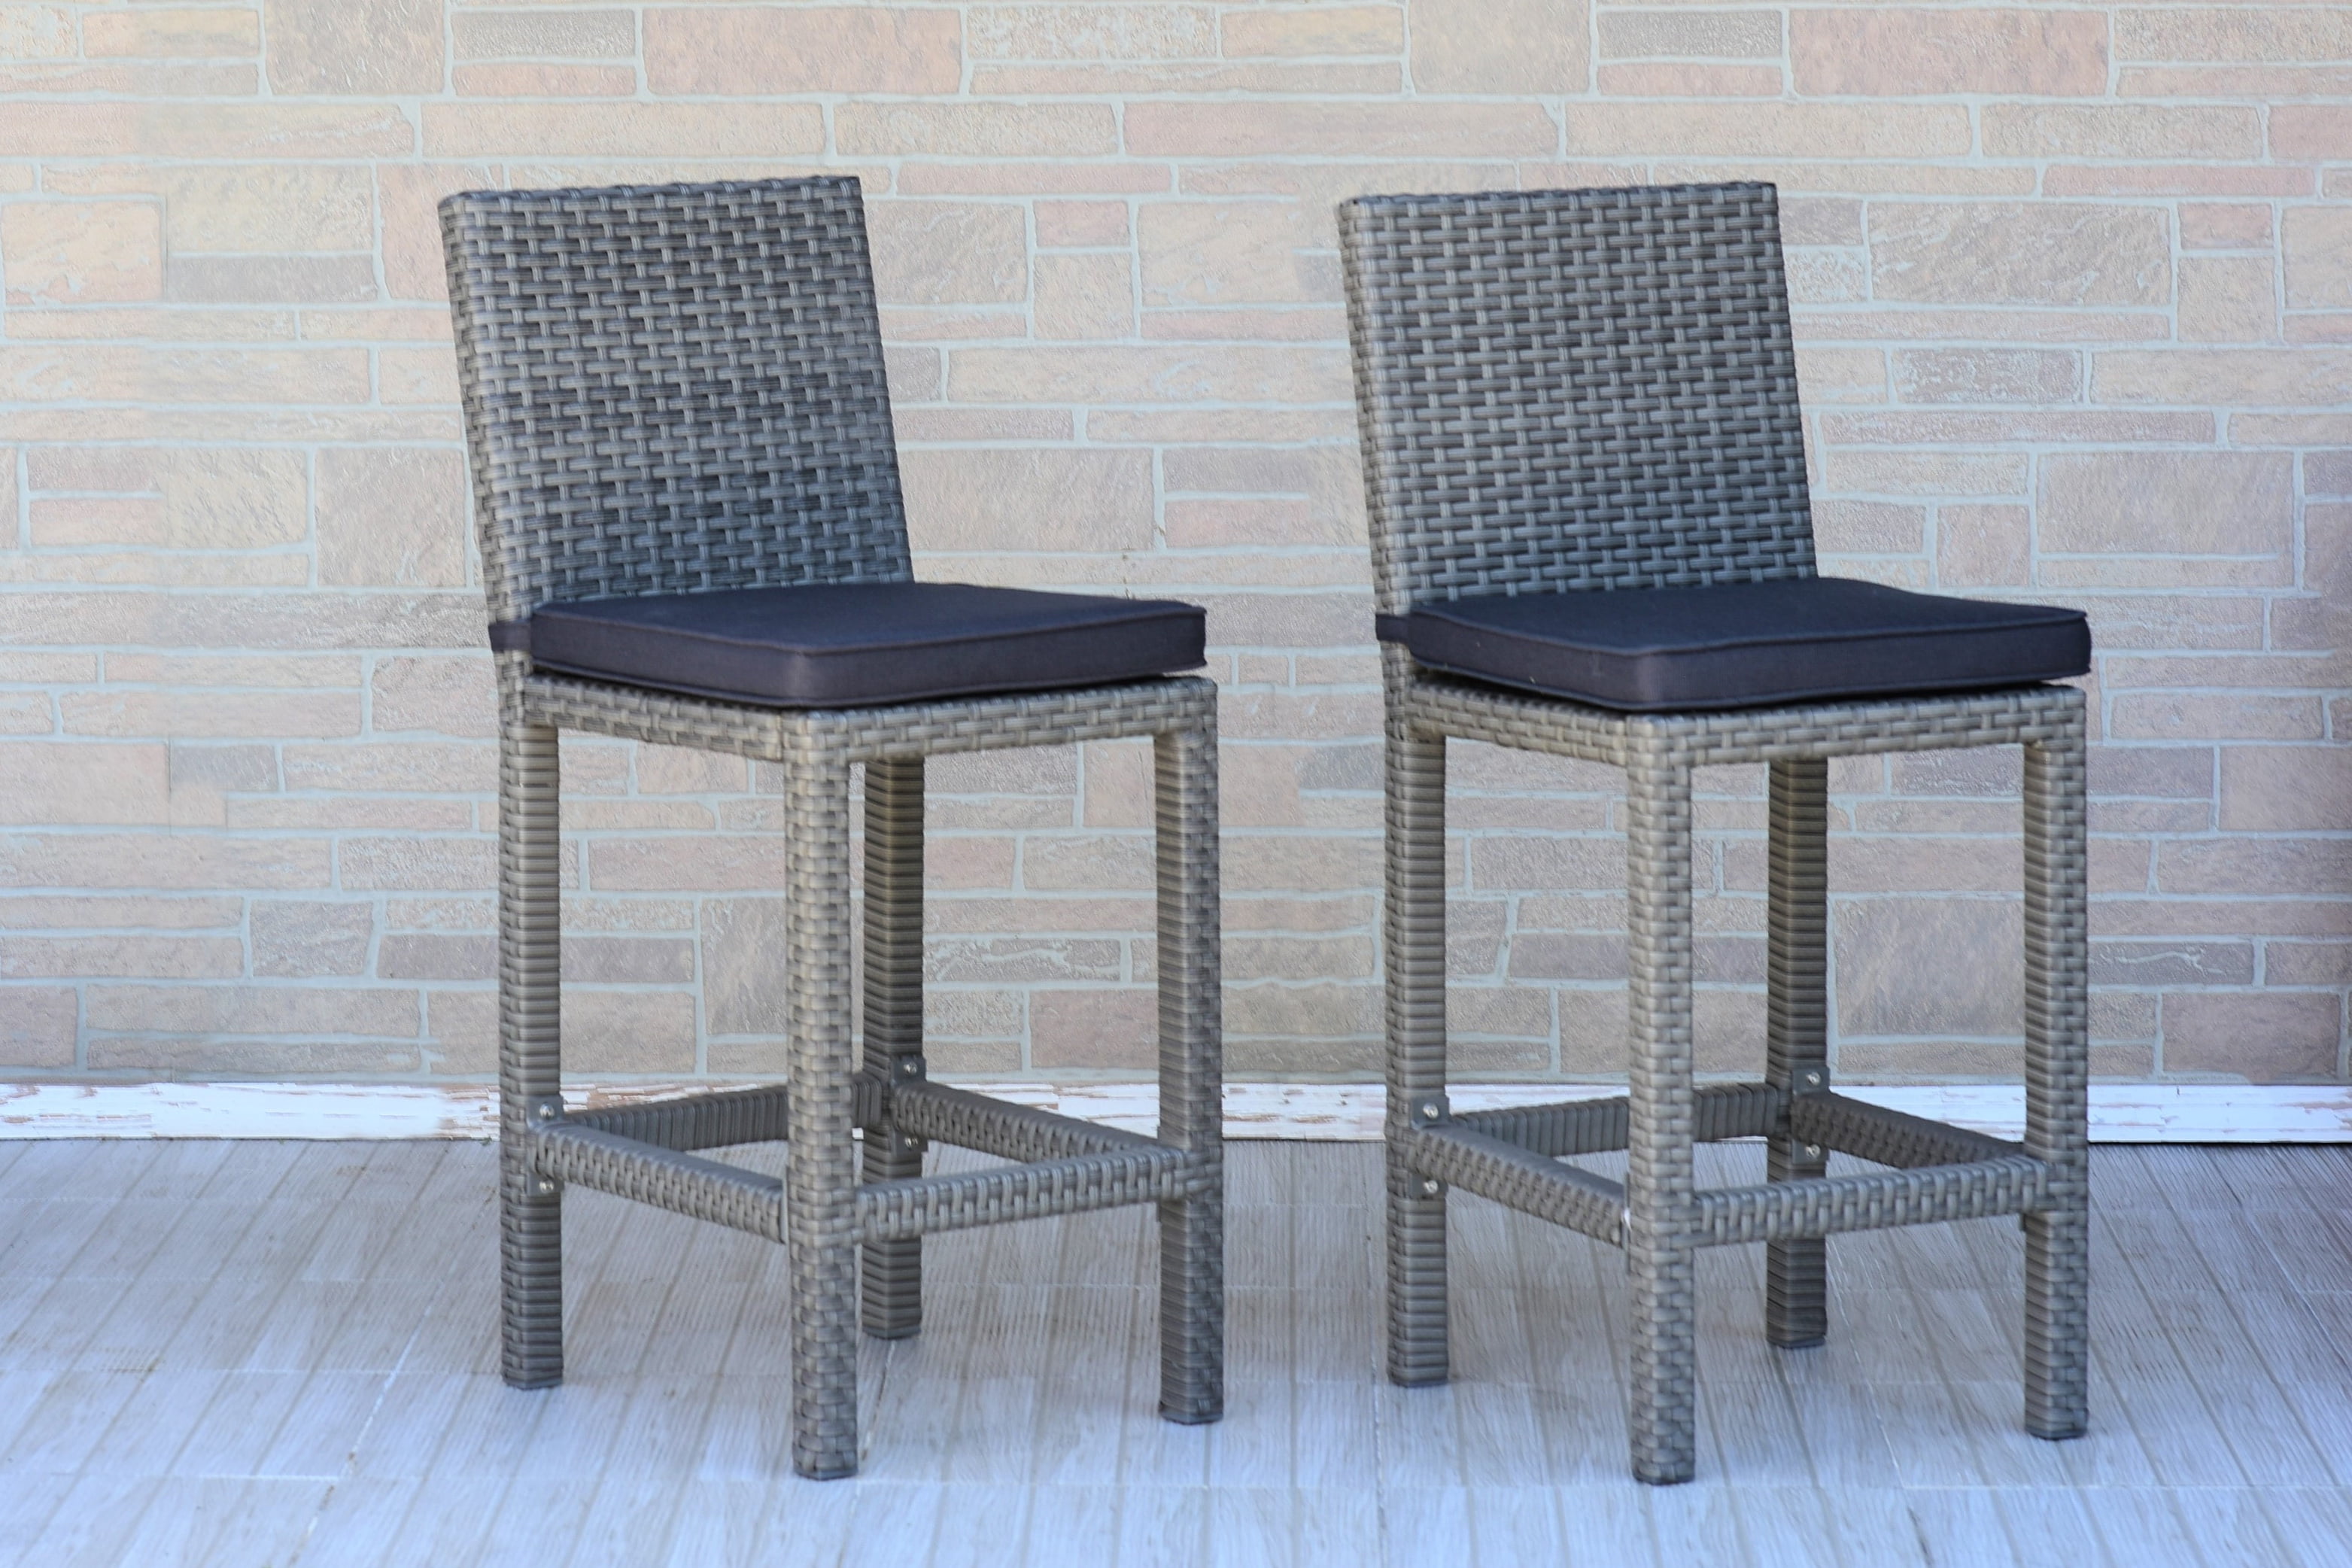 Atlantic Monza 43 Outdoor All Weather, Ford Grey White Wicker Outdoor Bar Stool